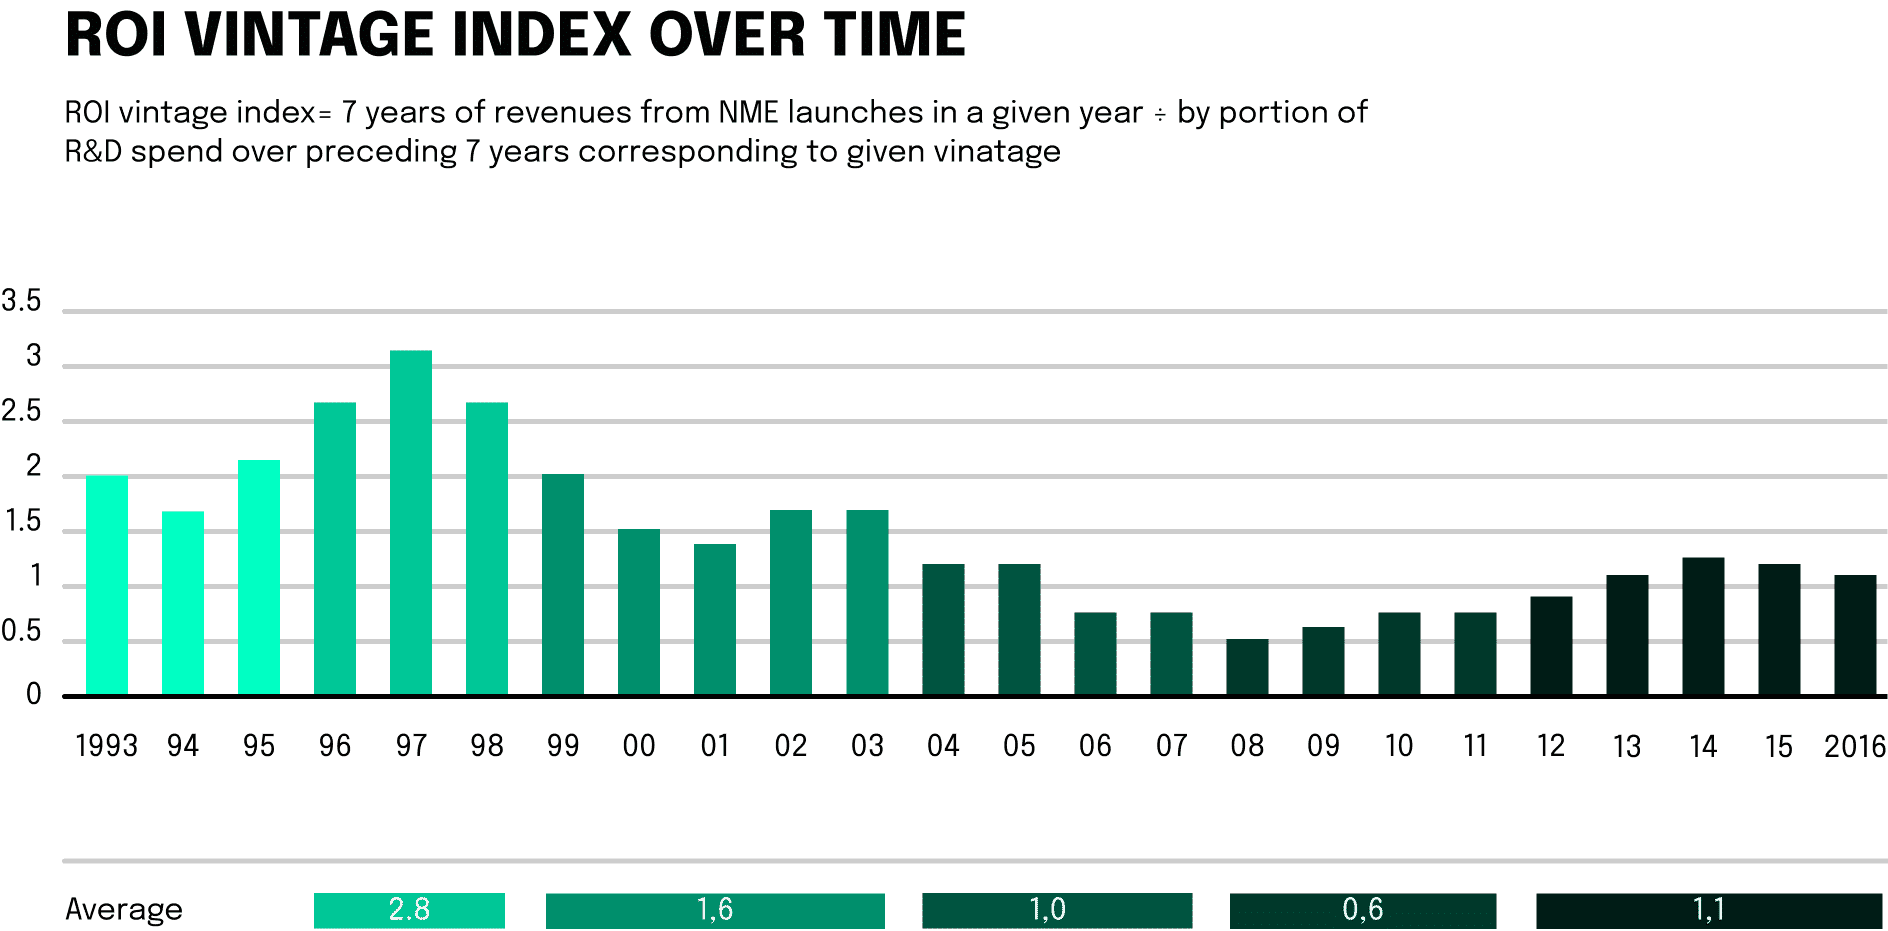 Graphic: ROI Vintage index over time